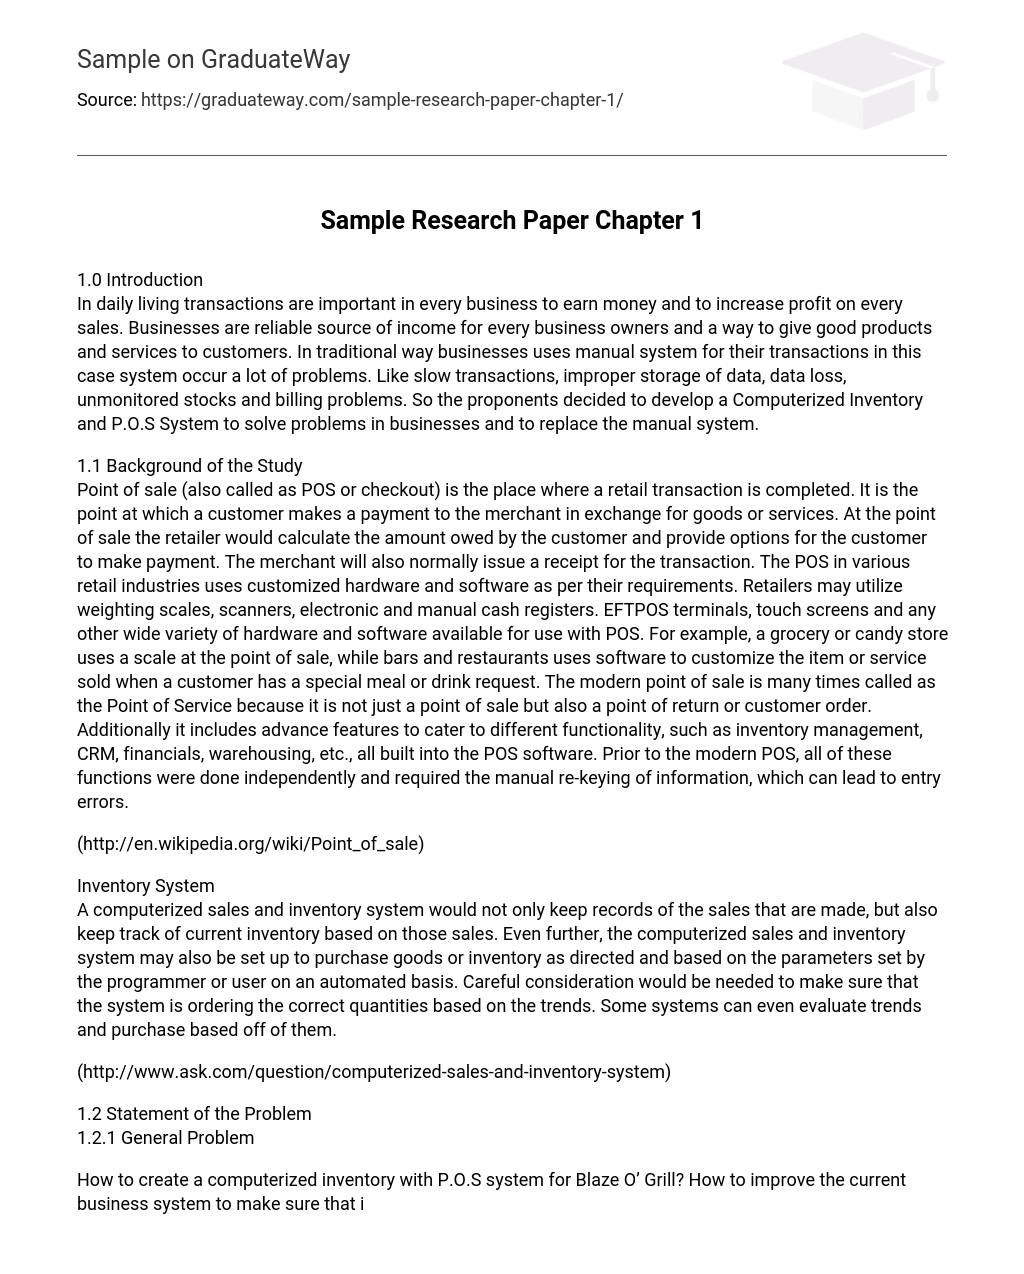 Sample Research Paper Chapter 1